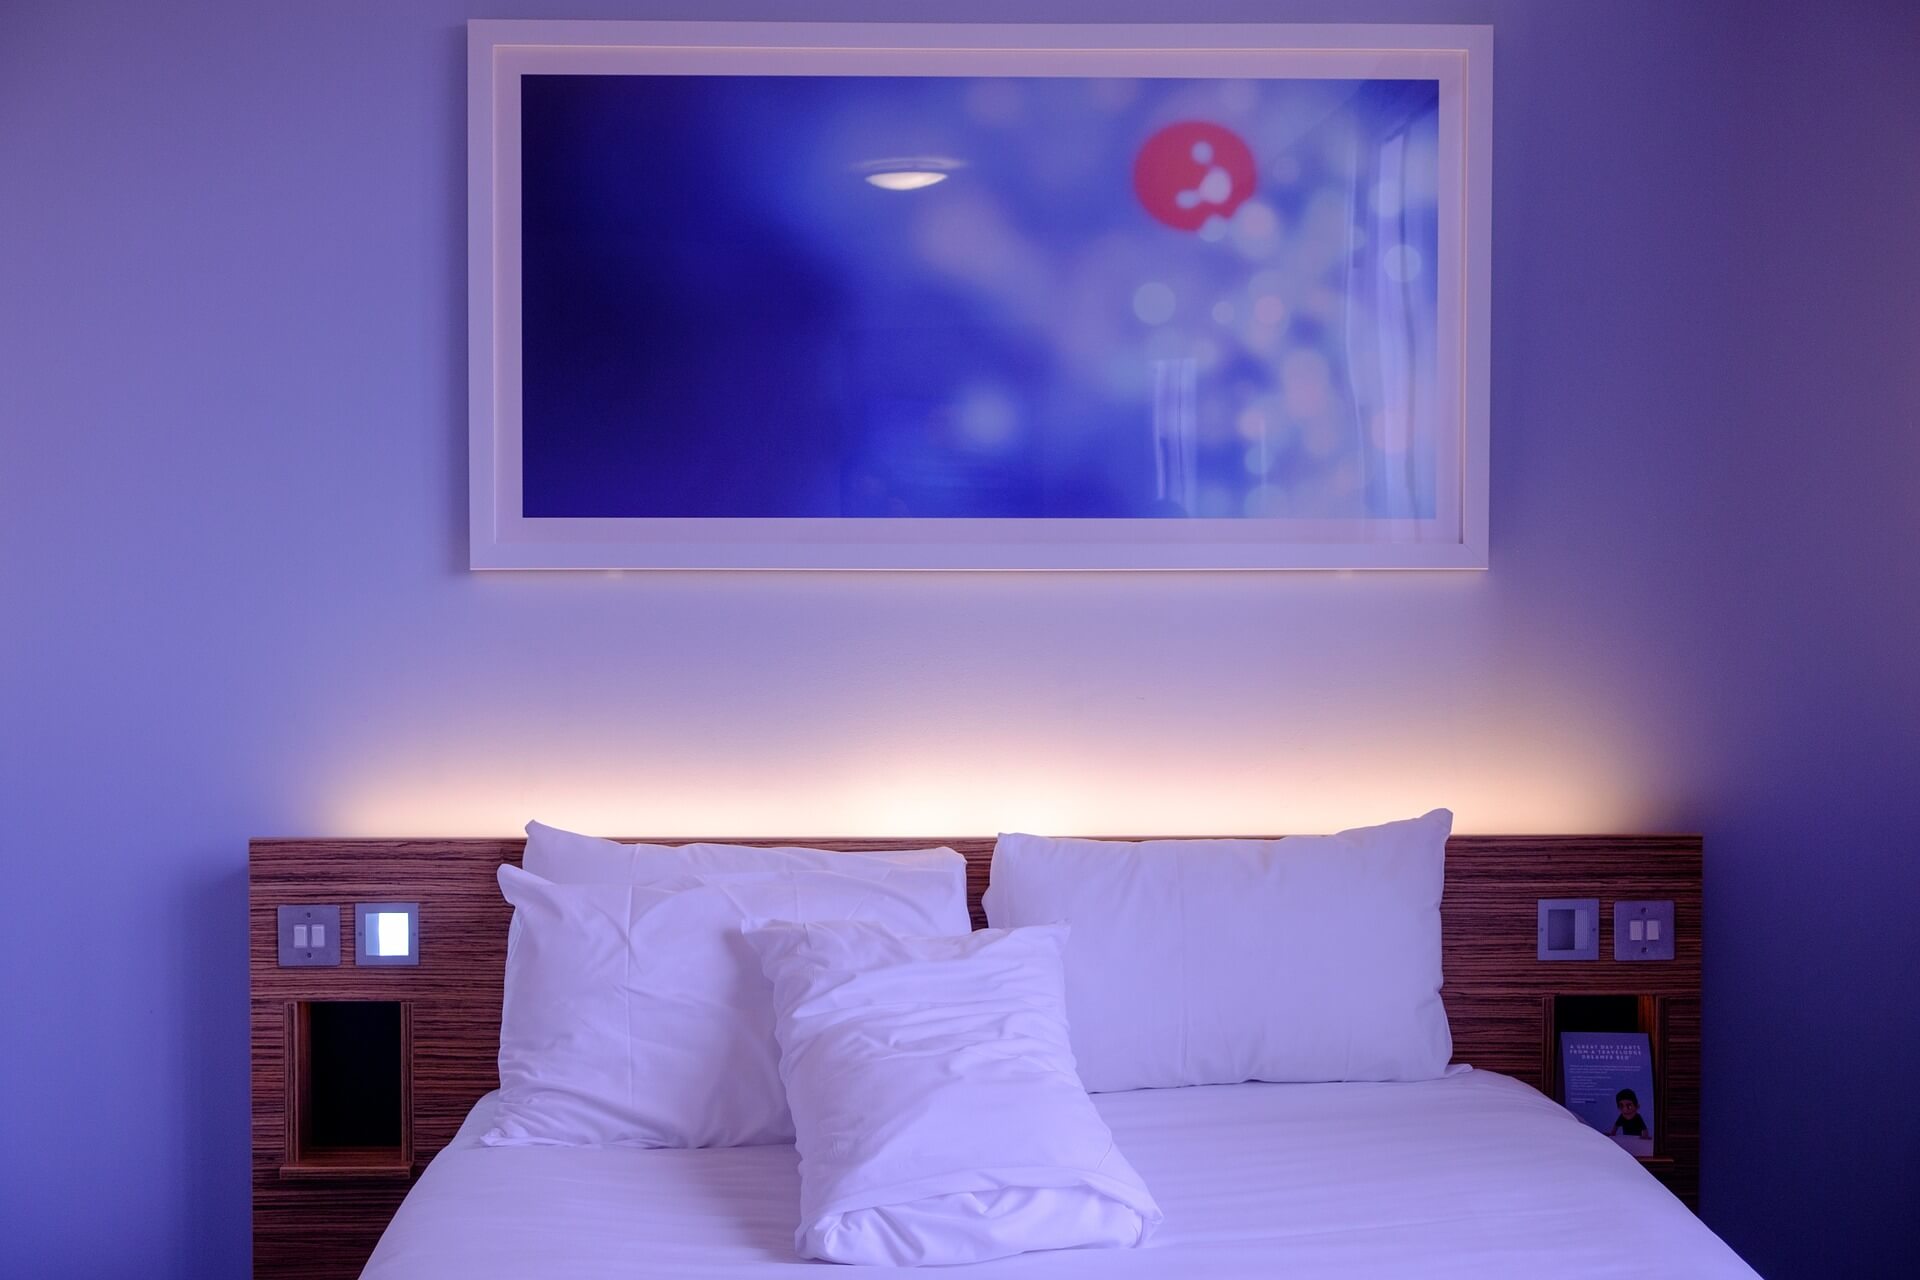 Improve Your Bedroom with LED Lights